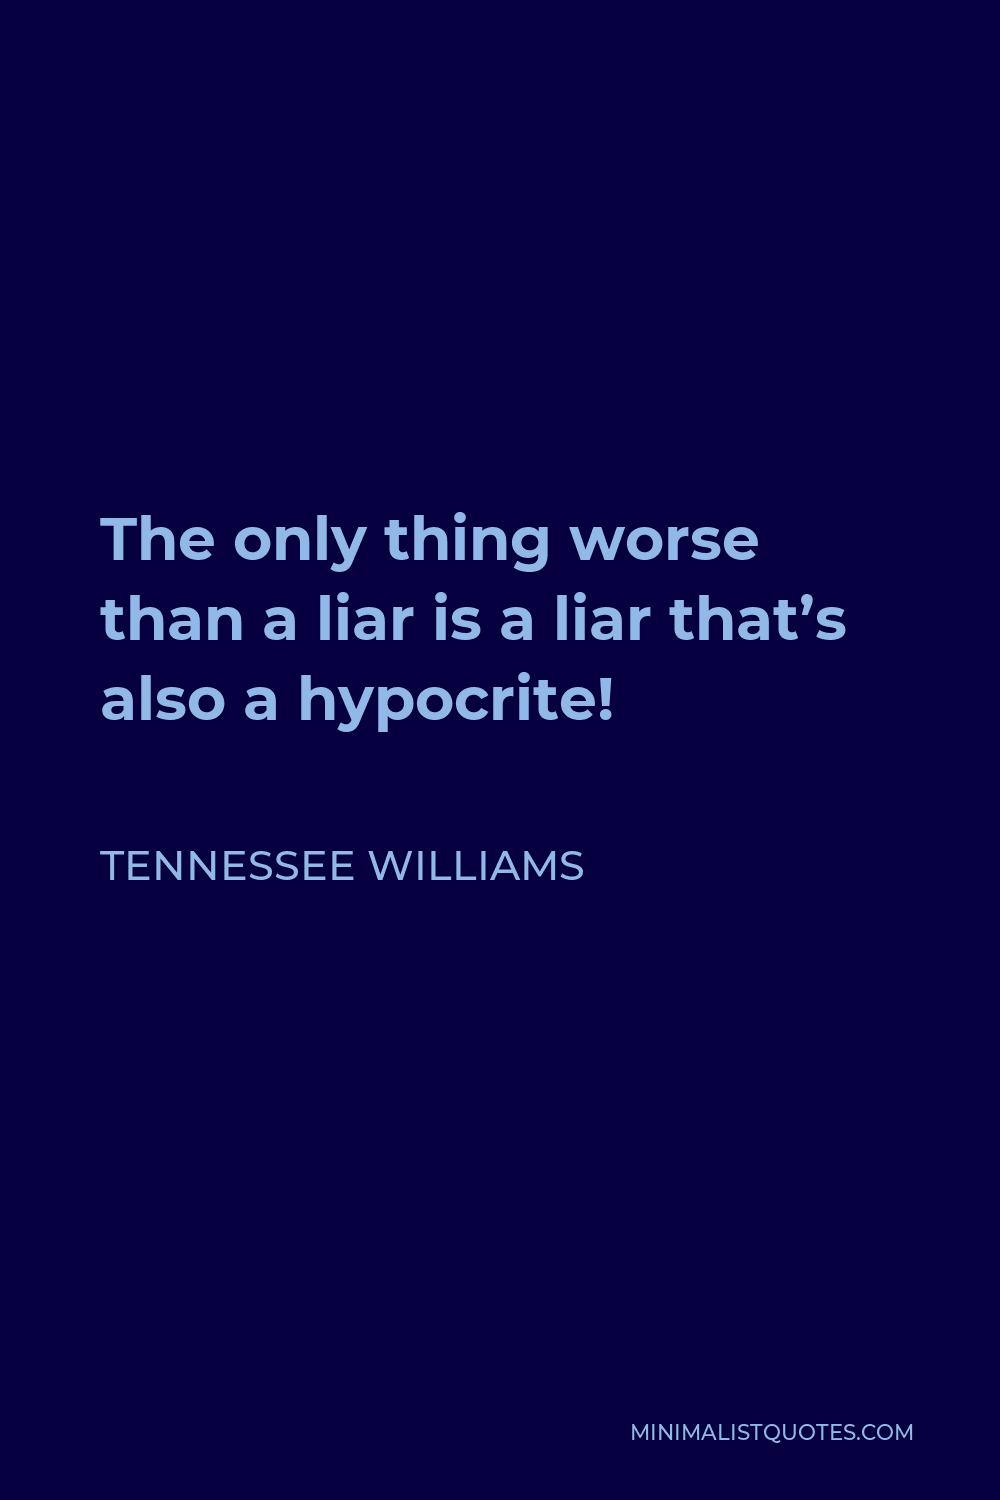 Tennessee Williams Quote - The only thing worse than a liar is a liar that’s also a hypocrite!